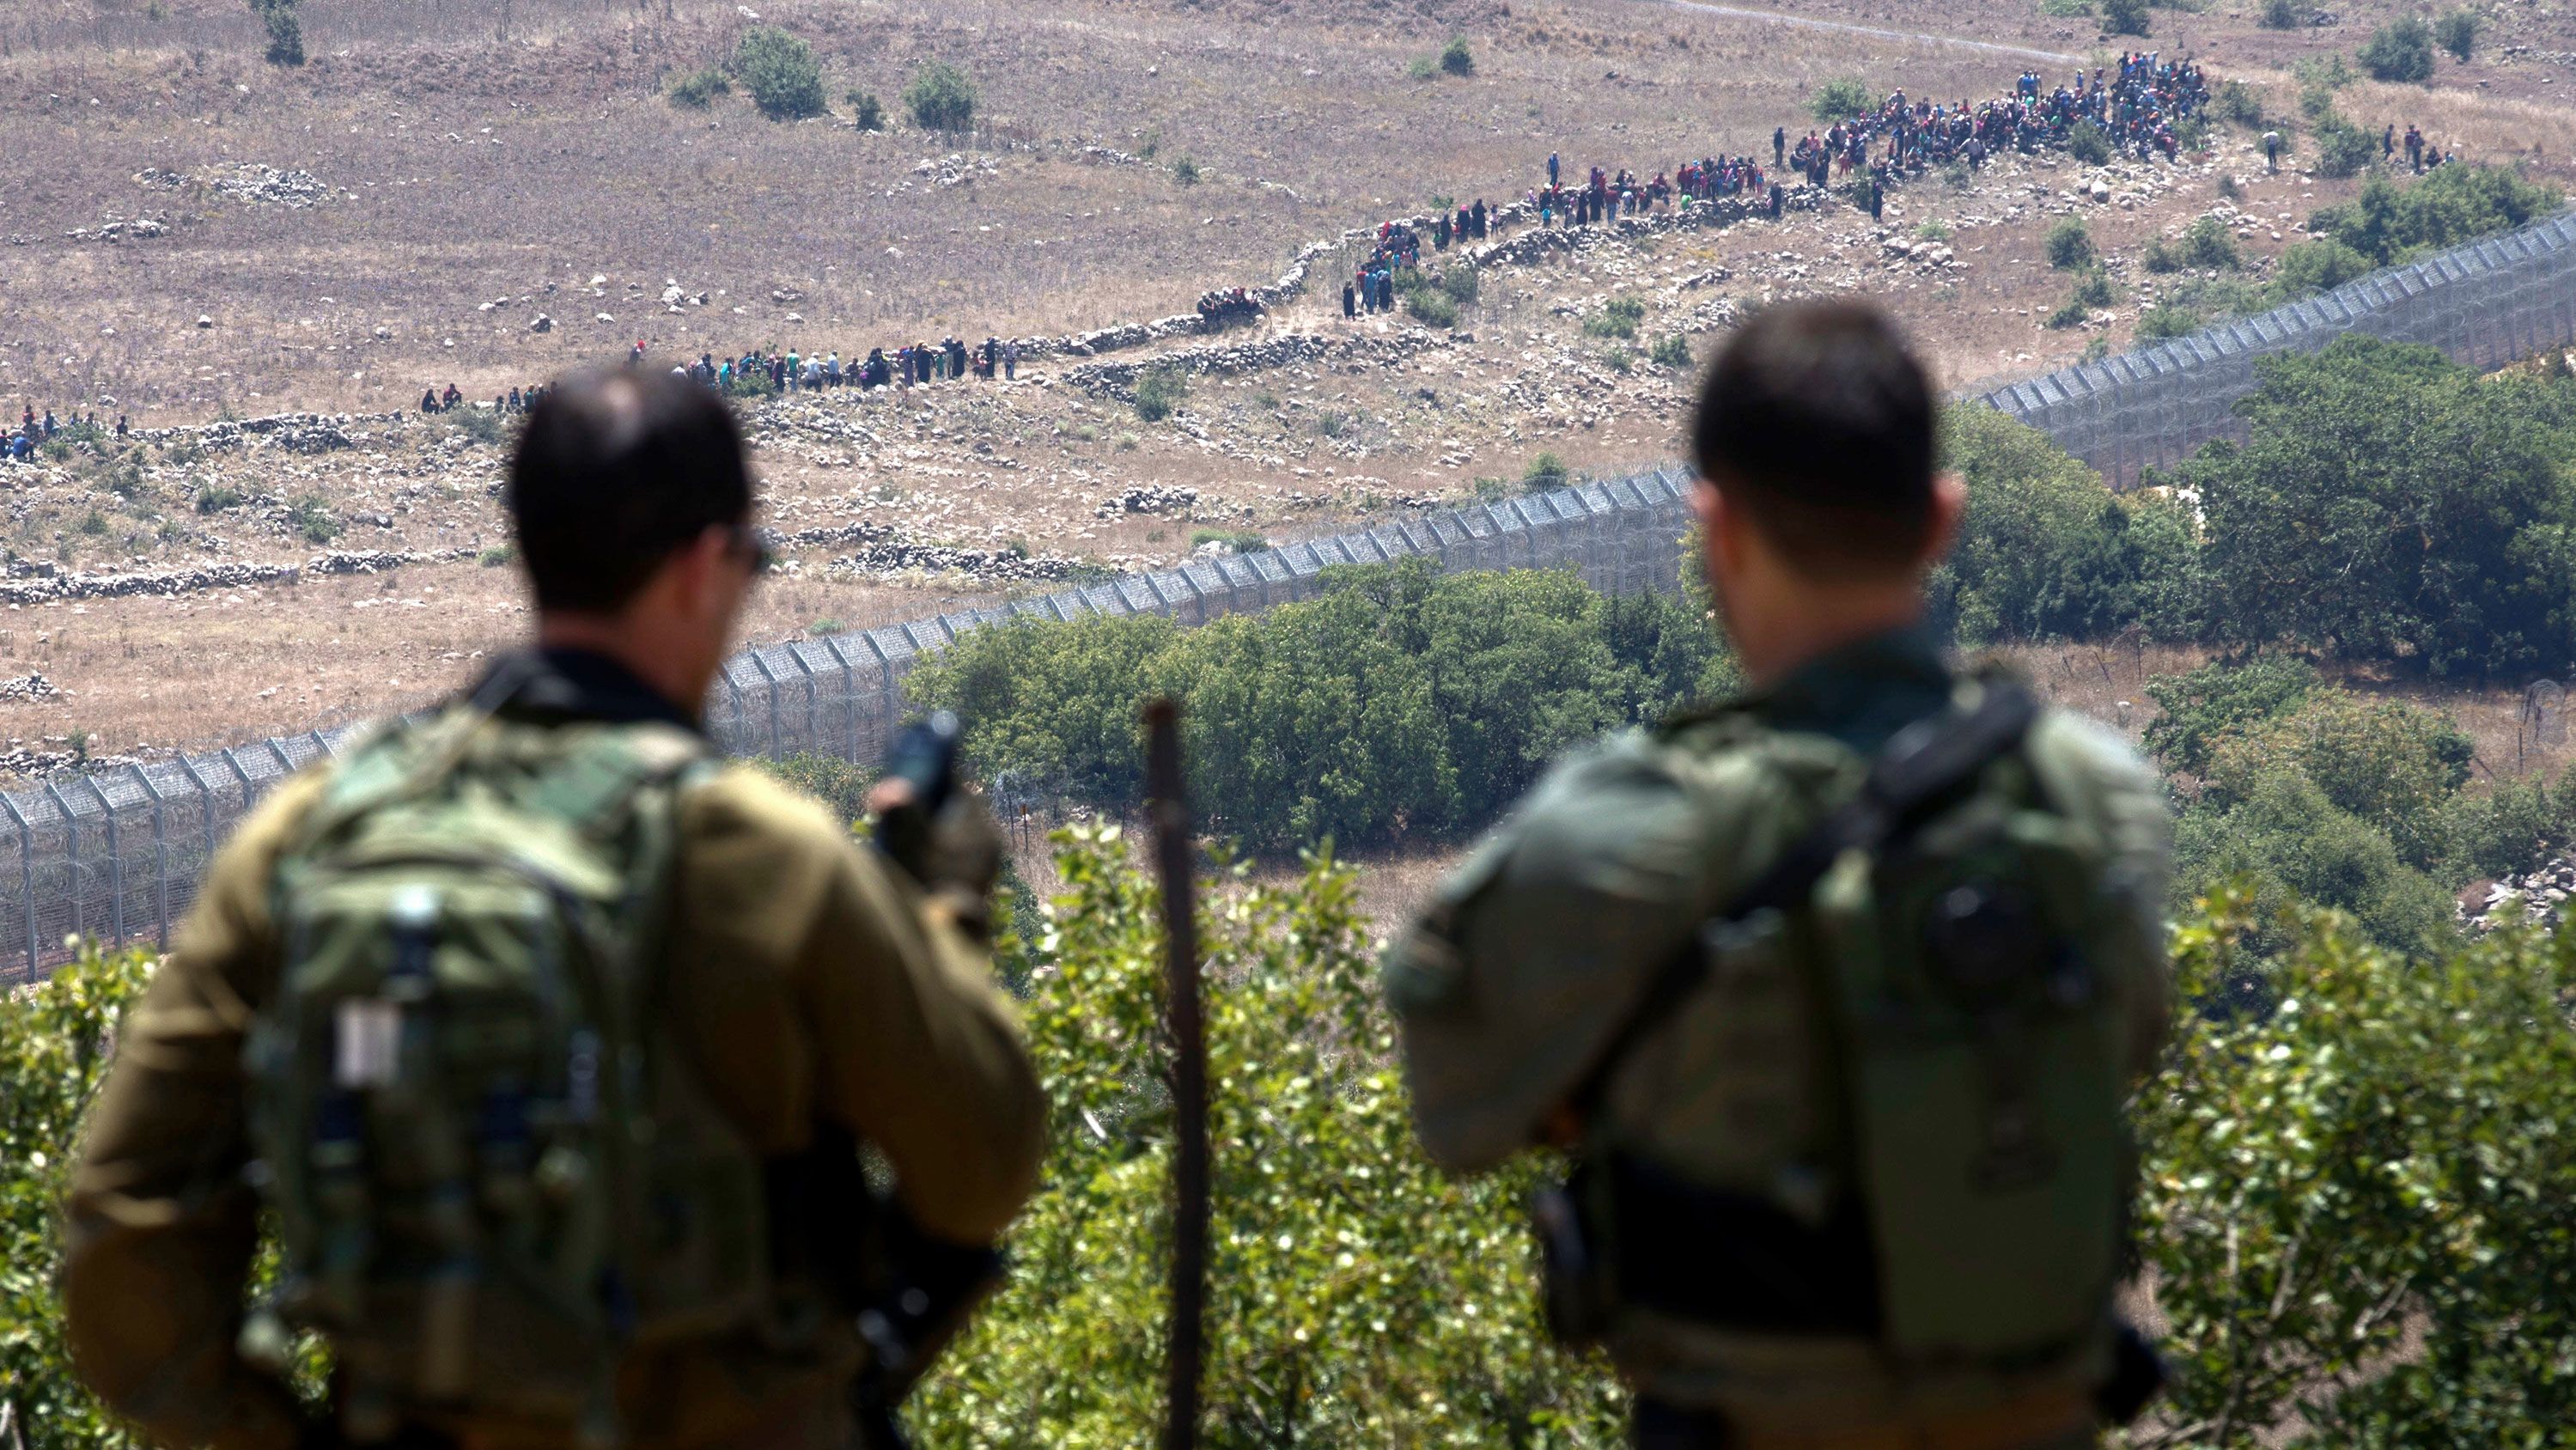 Israeli soldiers look on as Syrian refugees march towards the security fence in the Golan Heights on Tuesday.